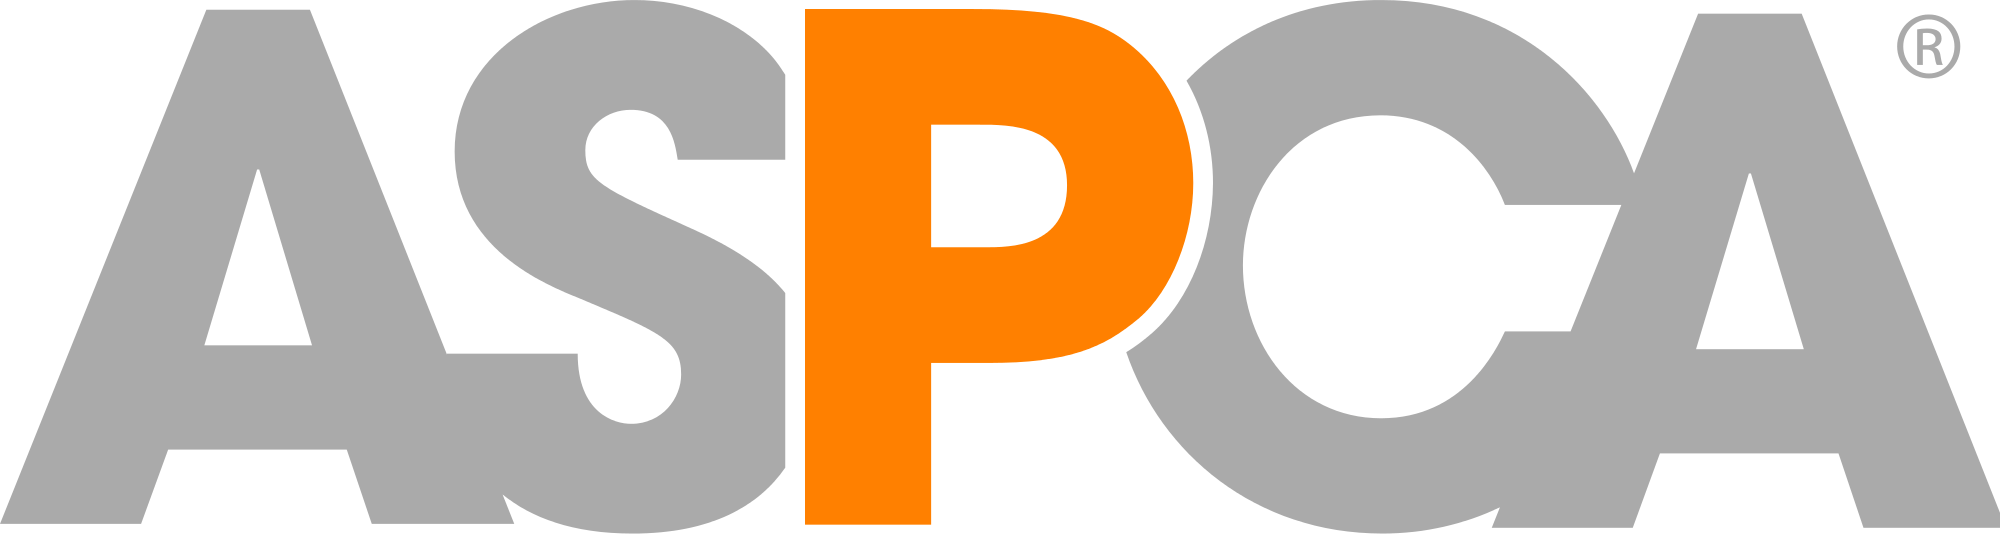 ASPCA Logo - American Society for the Prevention of Cruelty to Animals logo